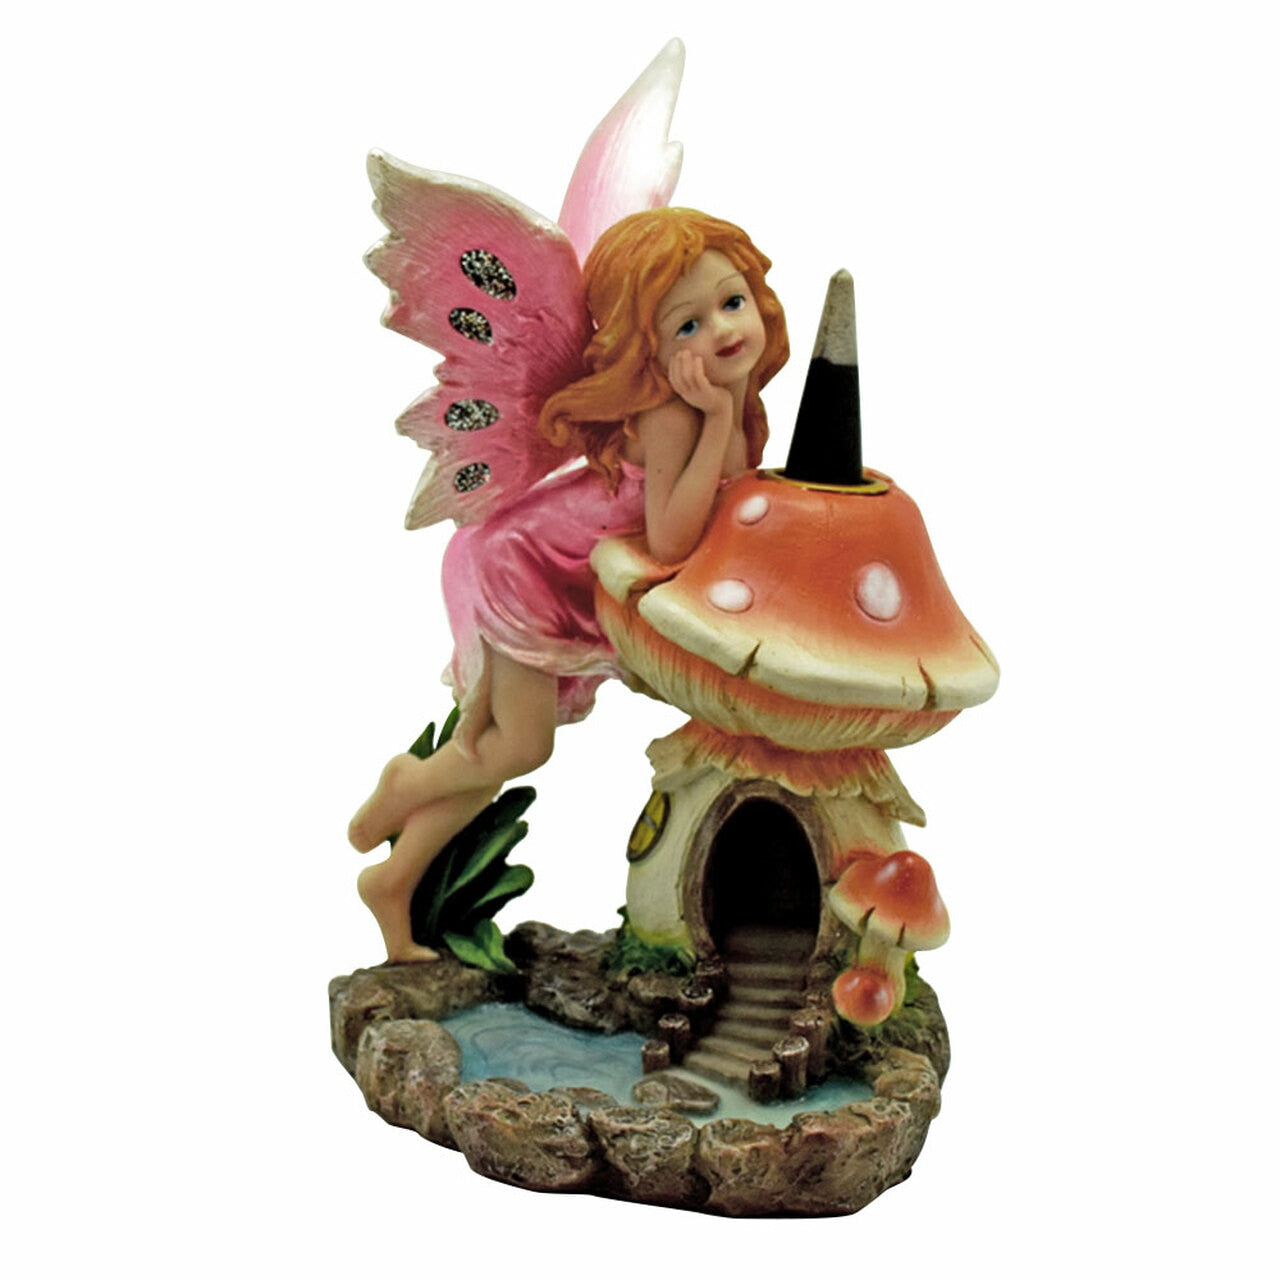 Fairy and mushroom back flow incense holder. One Love Hemp Co. 1449 Kingsway, Vancouver, B.C., Canada